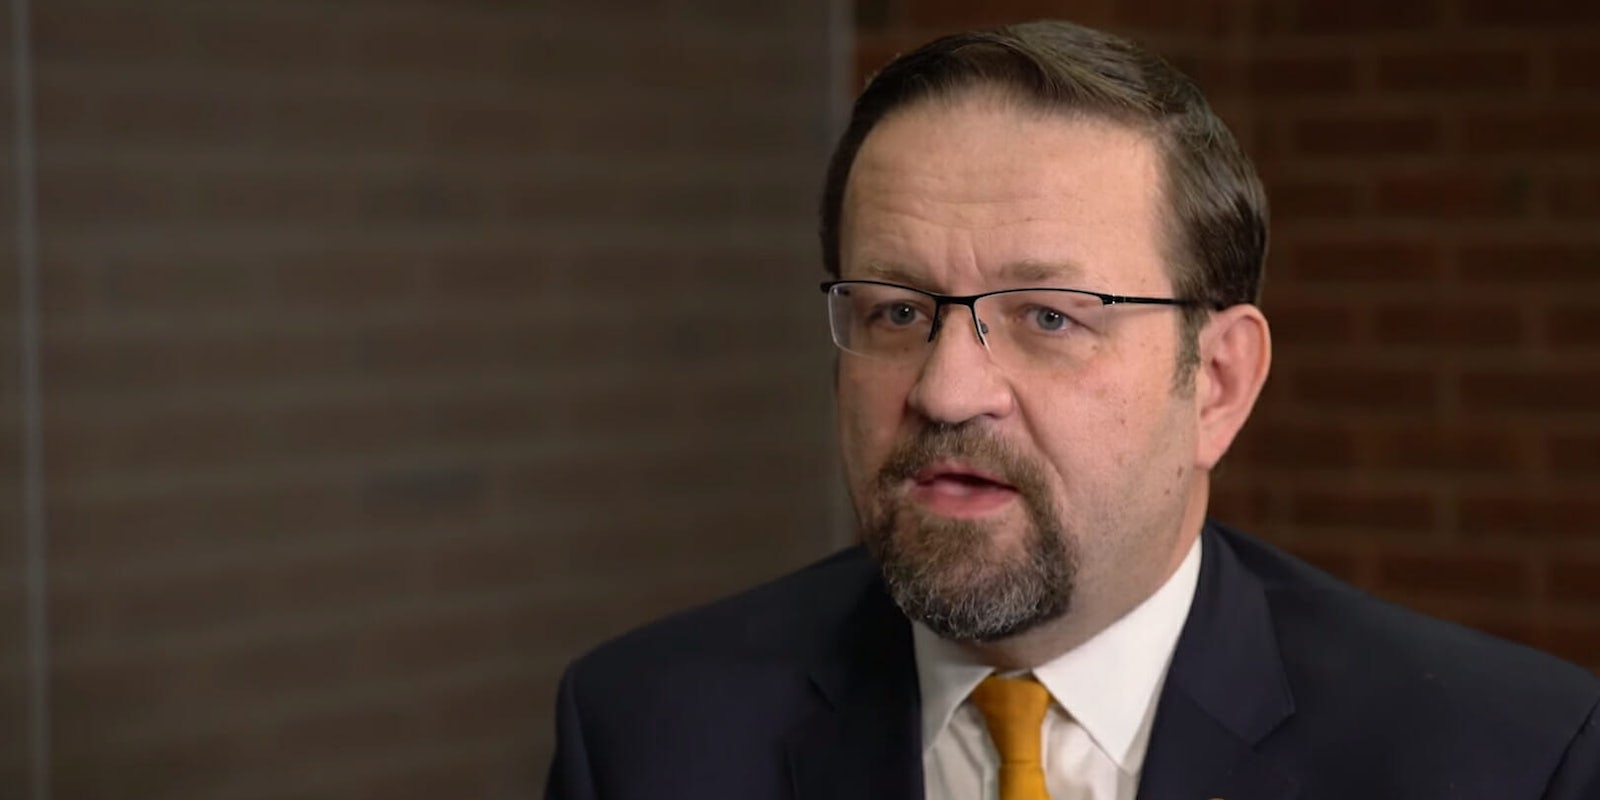 A caller dialed into CSPAN on Sunday to criticize former White House adviser Sebastian Gorka on Sunday for supporting President Donald Trump.